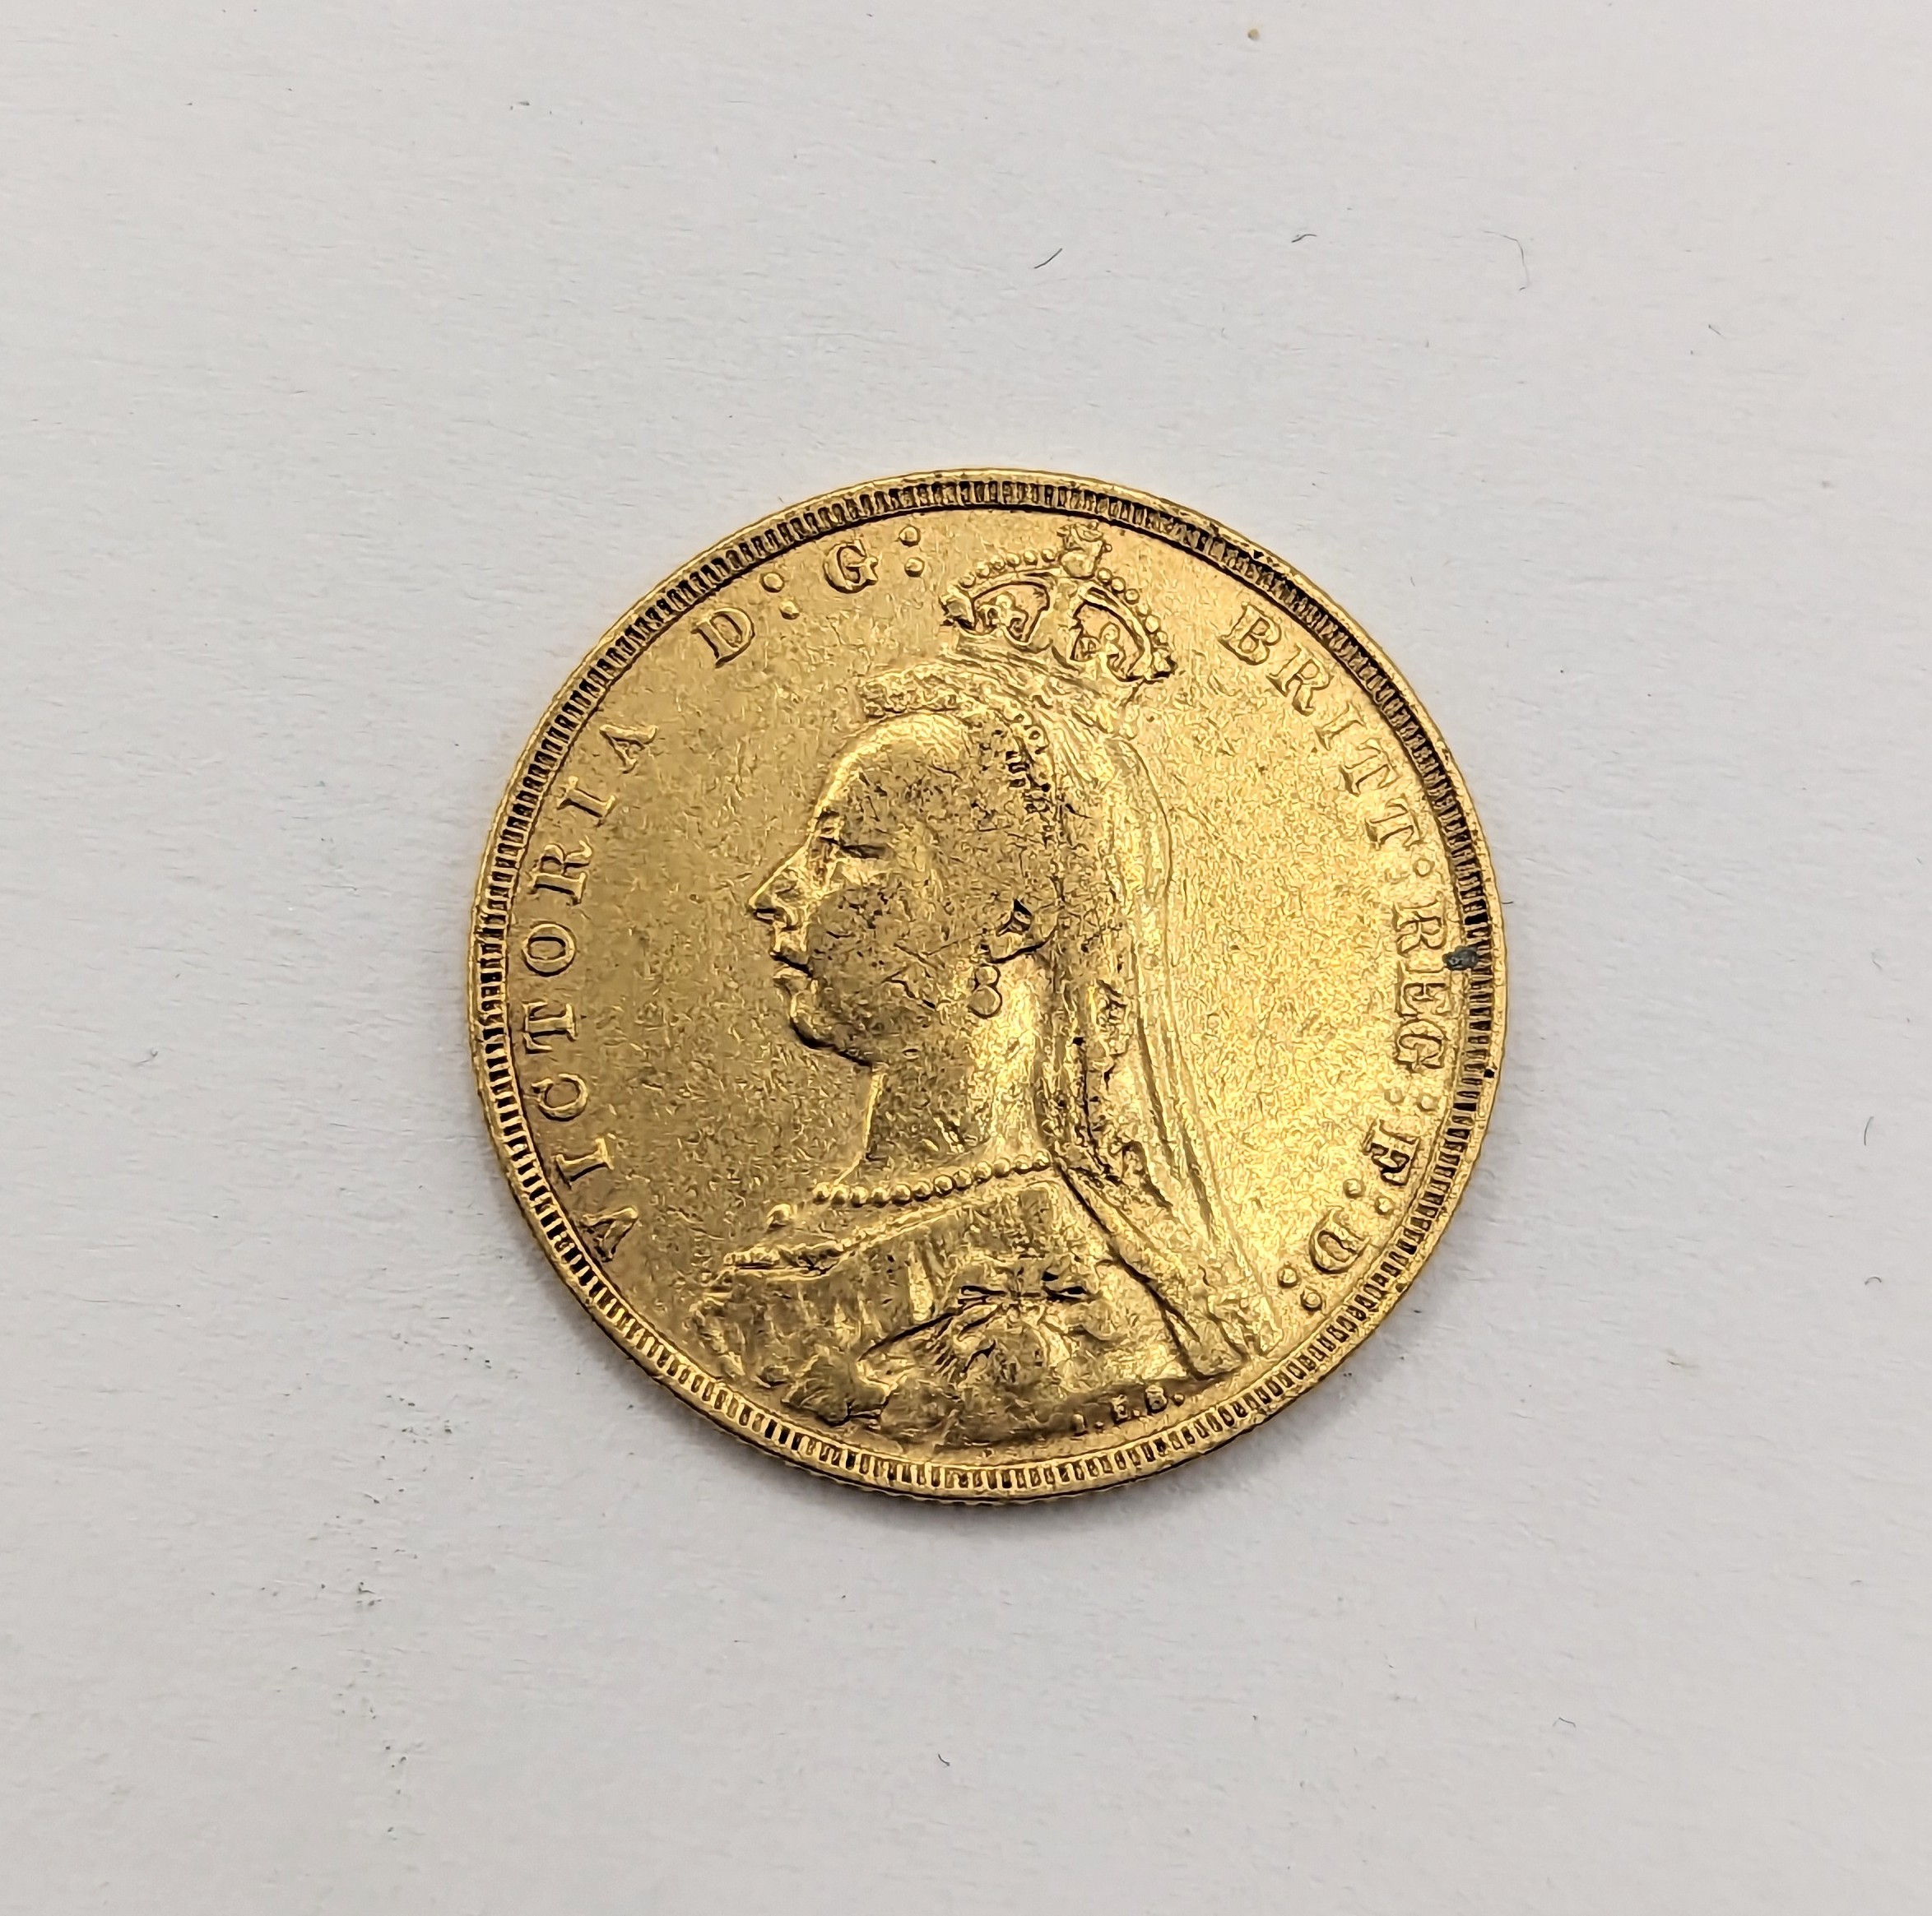 United Kingdom - Victoria (1837-1901), Full Sovereign, dated 1891, Second Legend Jubilee Bust, - Image 2 of 2